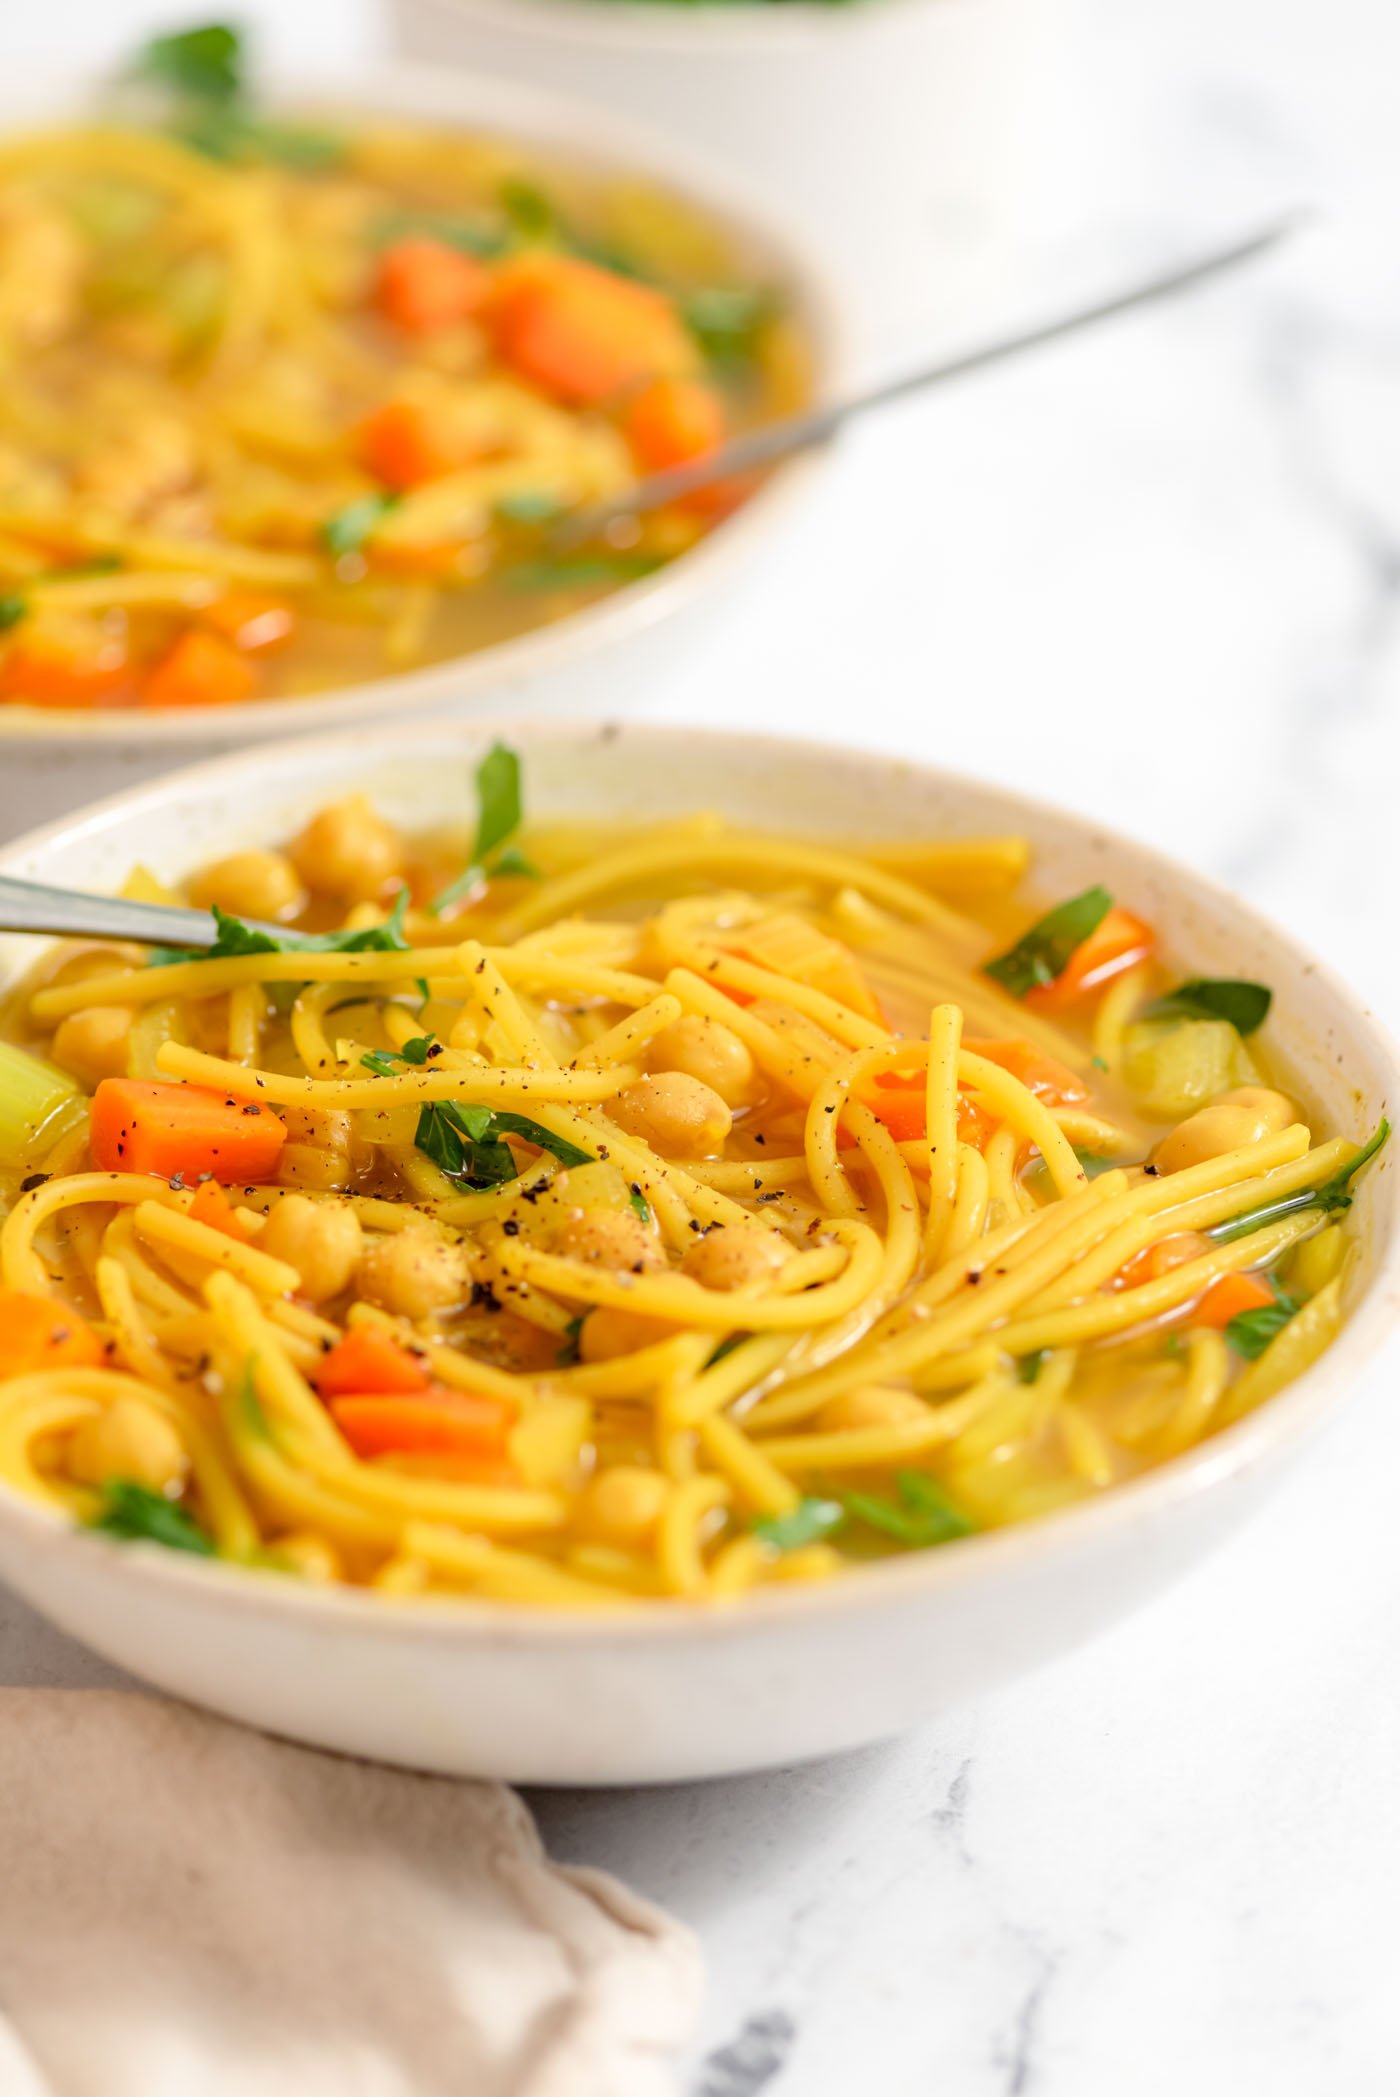 Classic Vegan Chicken Noodle Soup - The Cheeky Chickpea